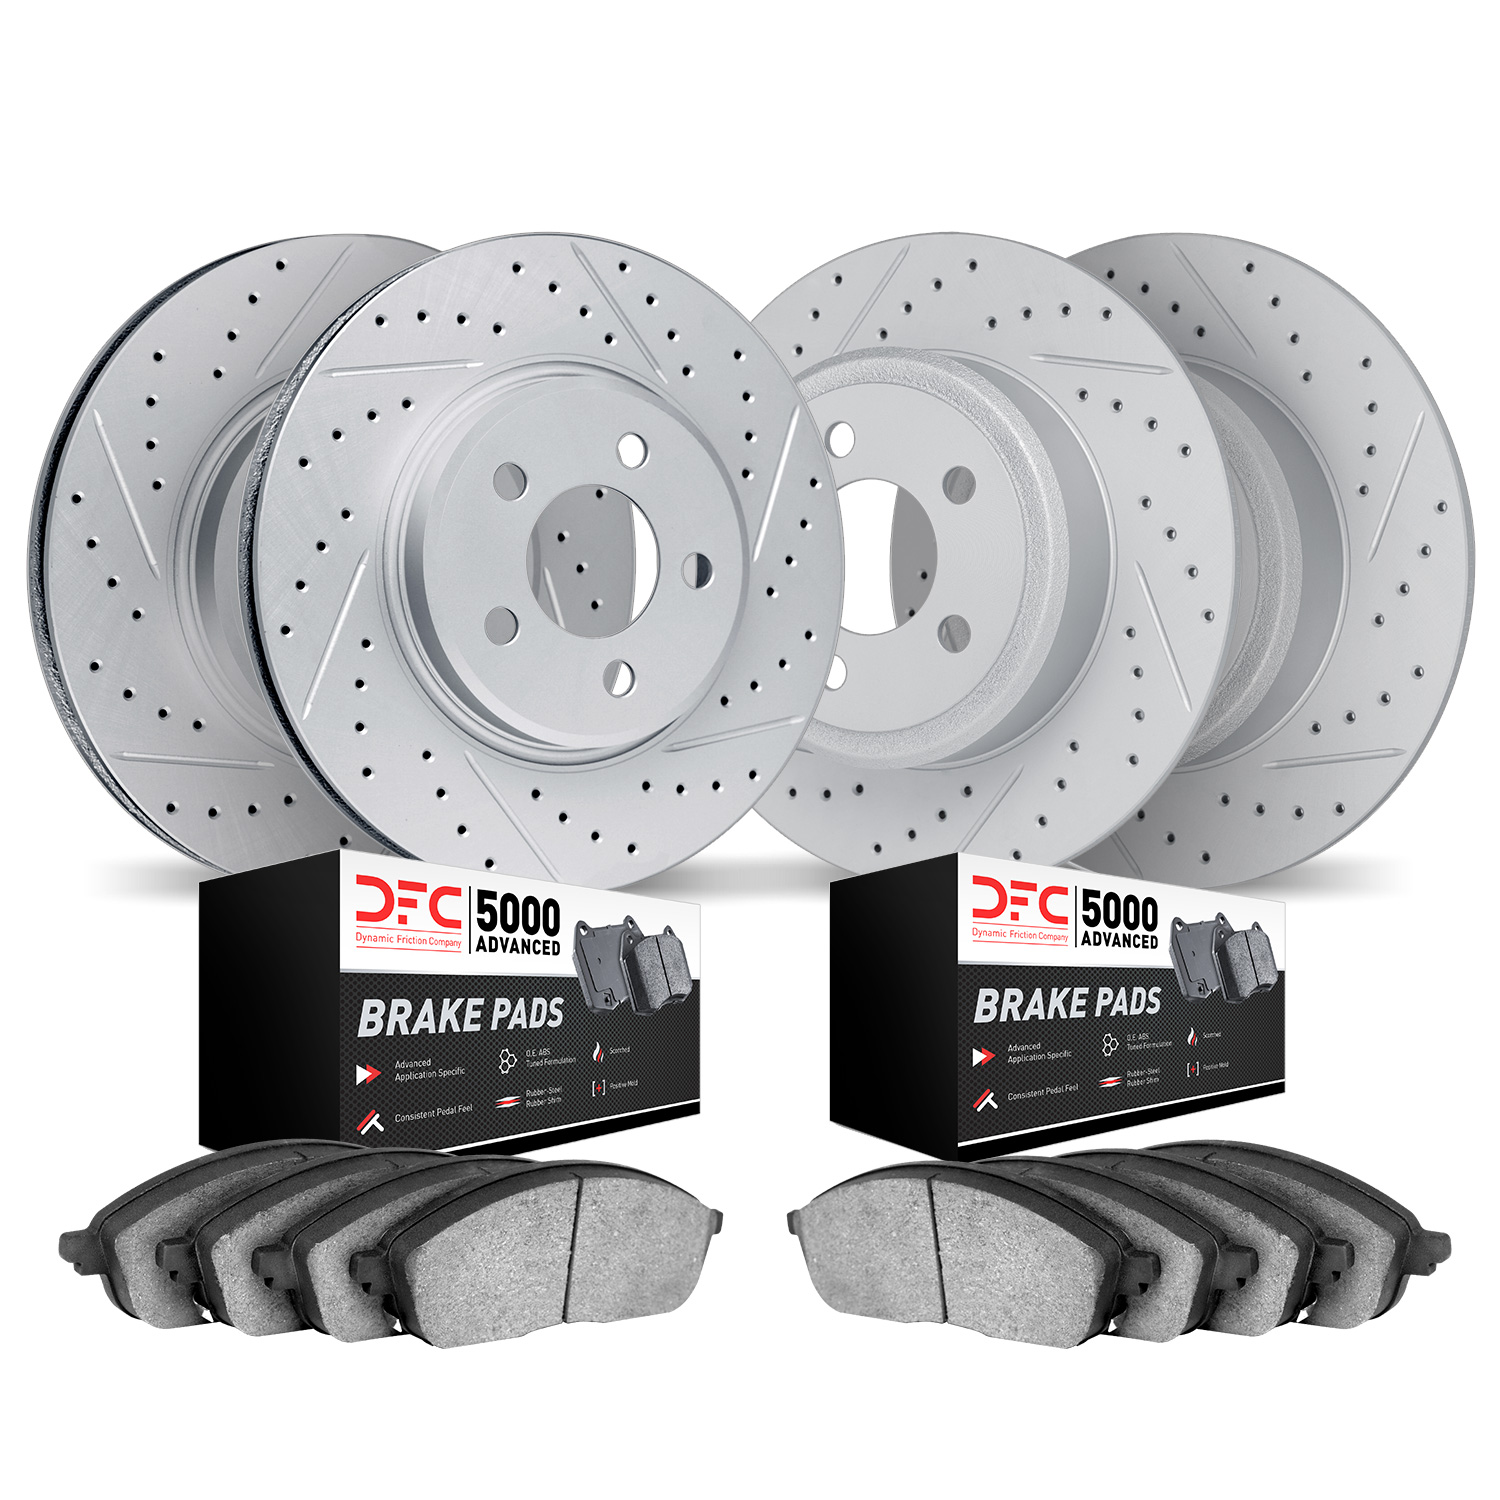 2504-59049 Geoperformance Drilled/Slotted Rotors w/5000 Advanced Brake Pads Kit, 2020-2021 Acura/Honda, Position: Front and Rear